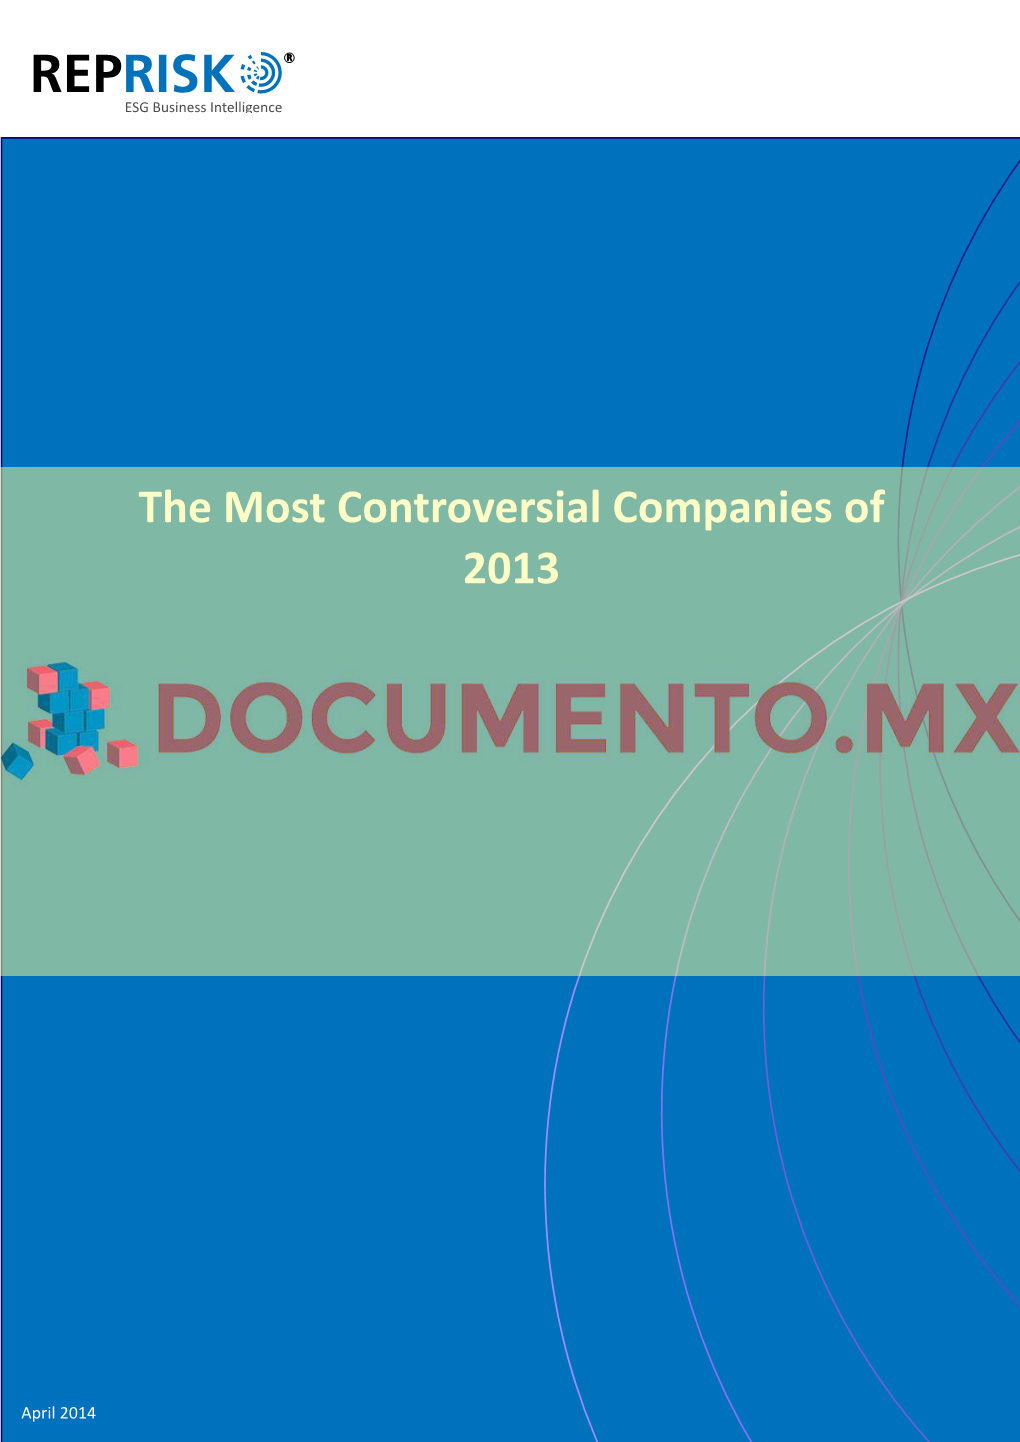 The Most Controversial Companies of 2013